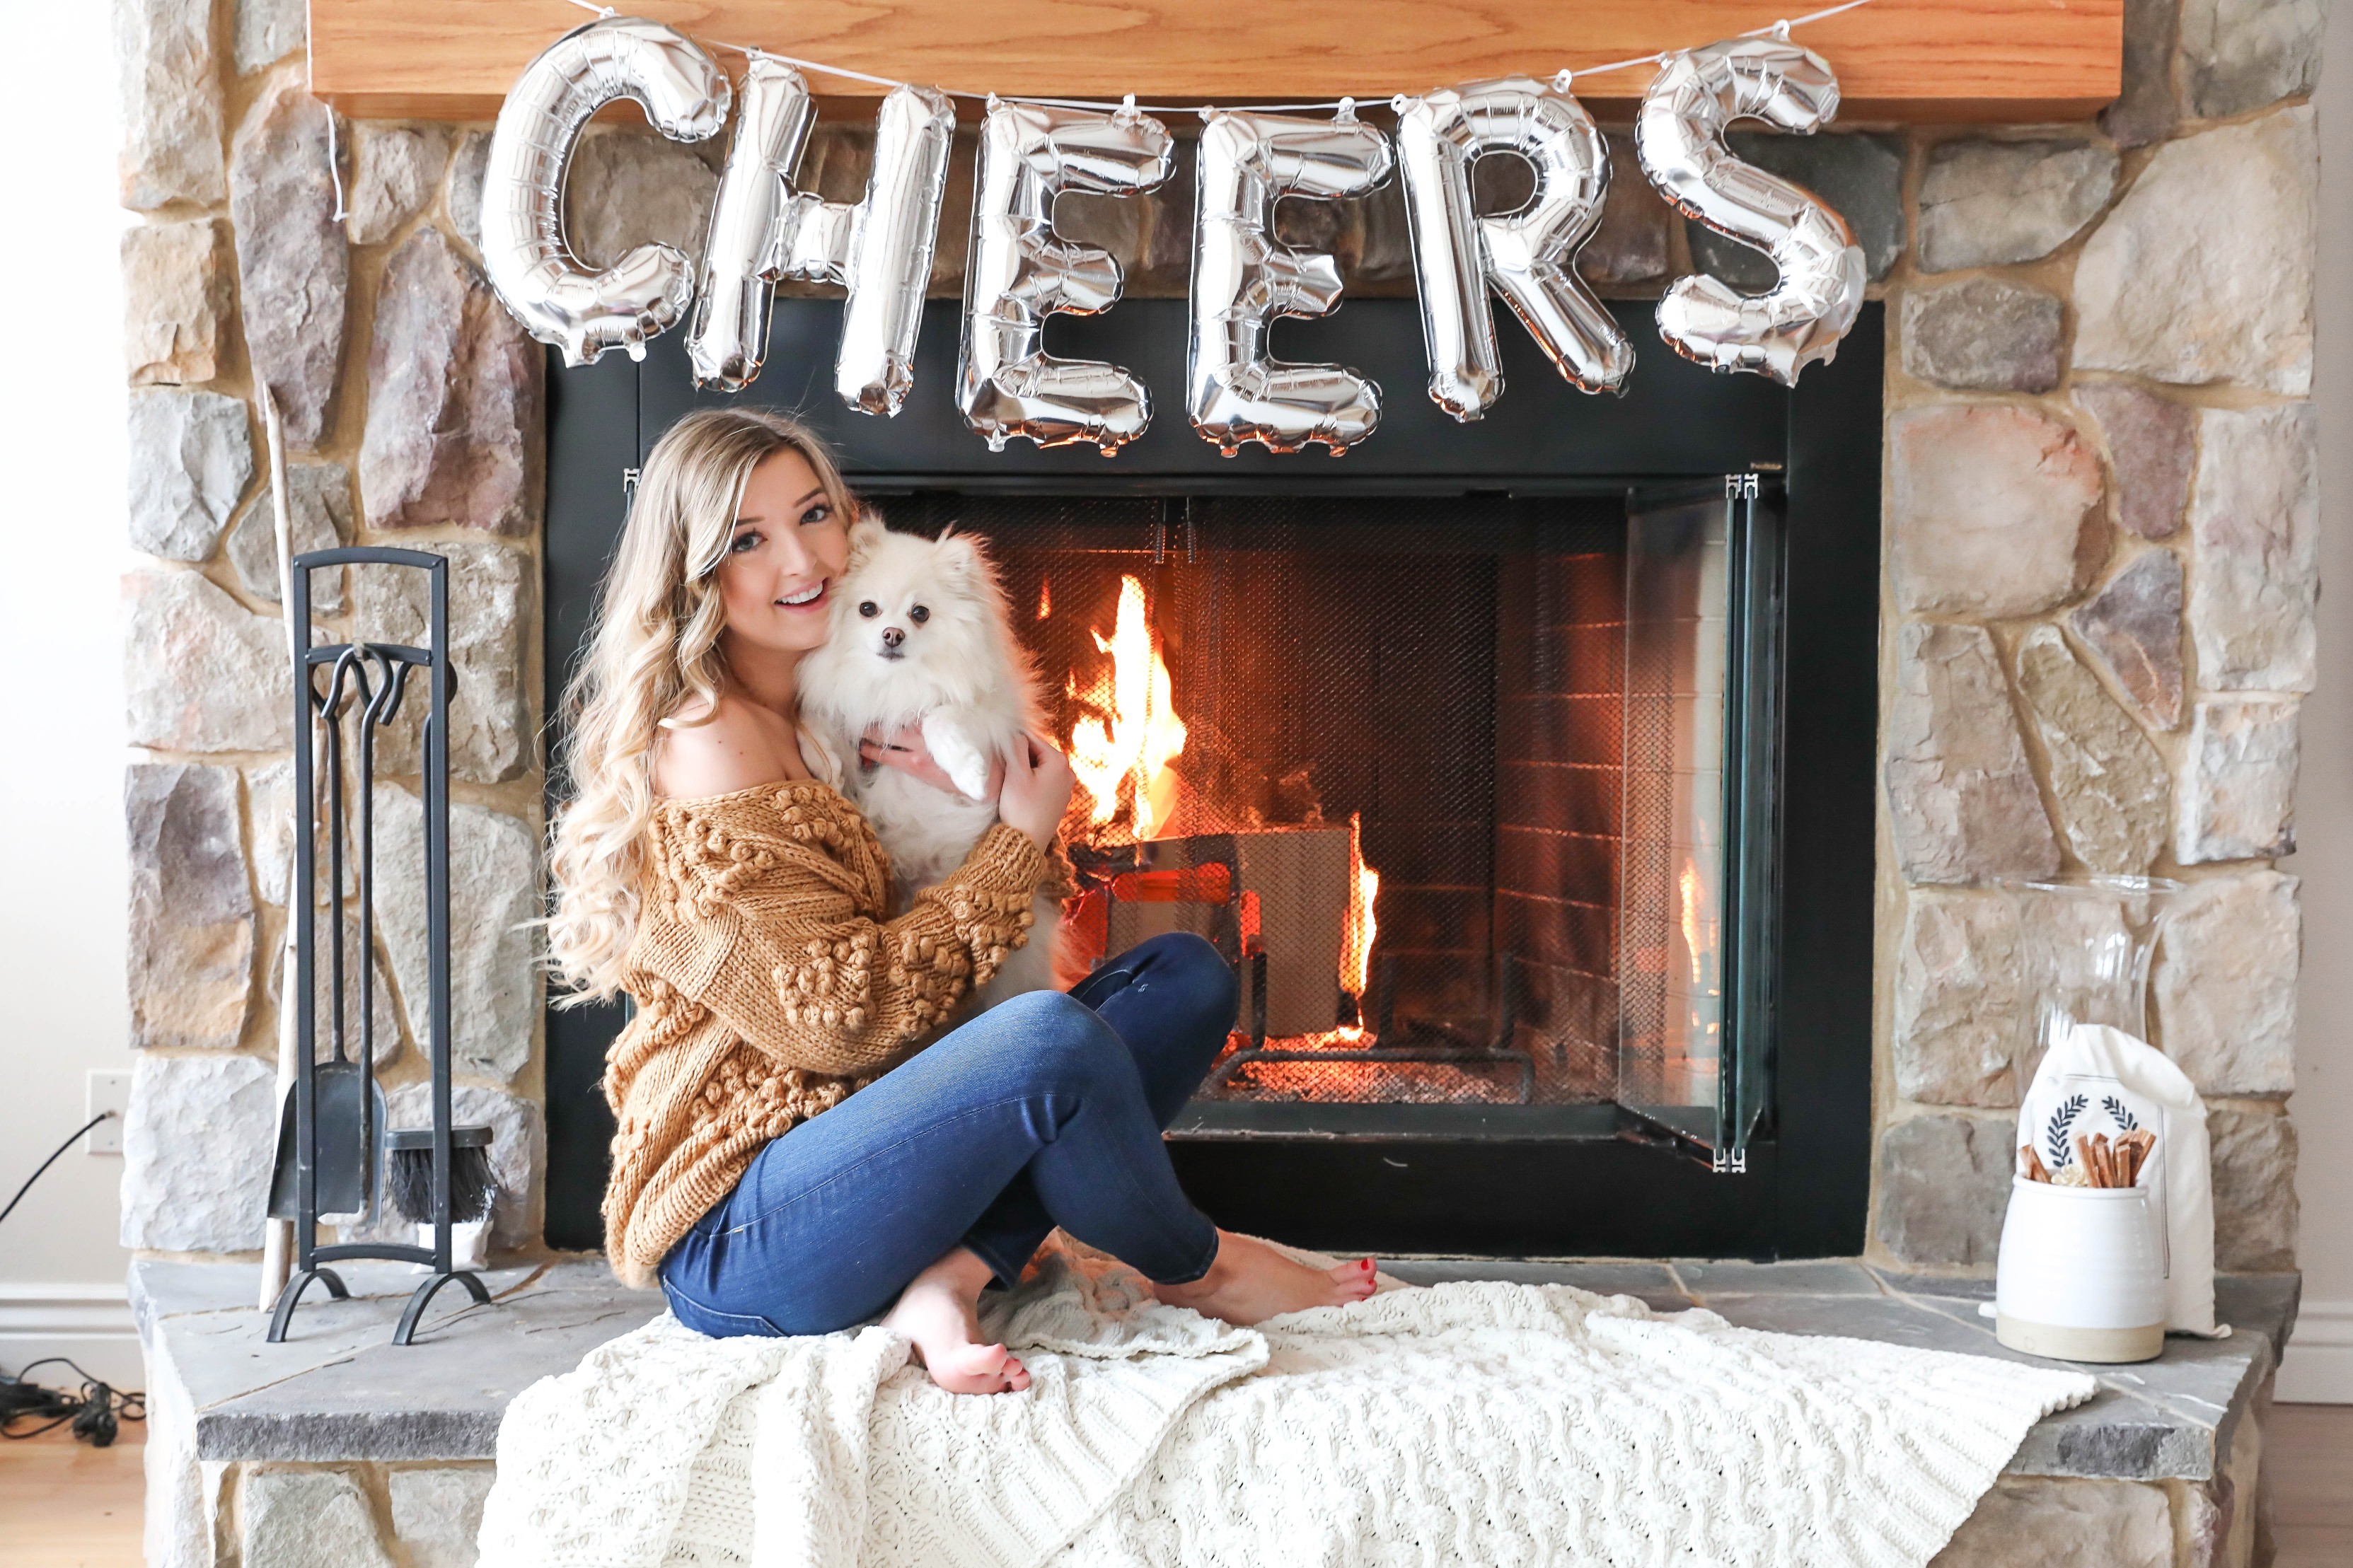 Happy New Year! The cutest photoshoot with "cheers" balloons! New Year's Eve photoshoot next to a cozy fireplace! I also list out all my resolutions for the year! My cute Pomeranian pup is featured in some of the photos! Details on fashion blog daily dose of charm by lauren lindmark